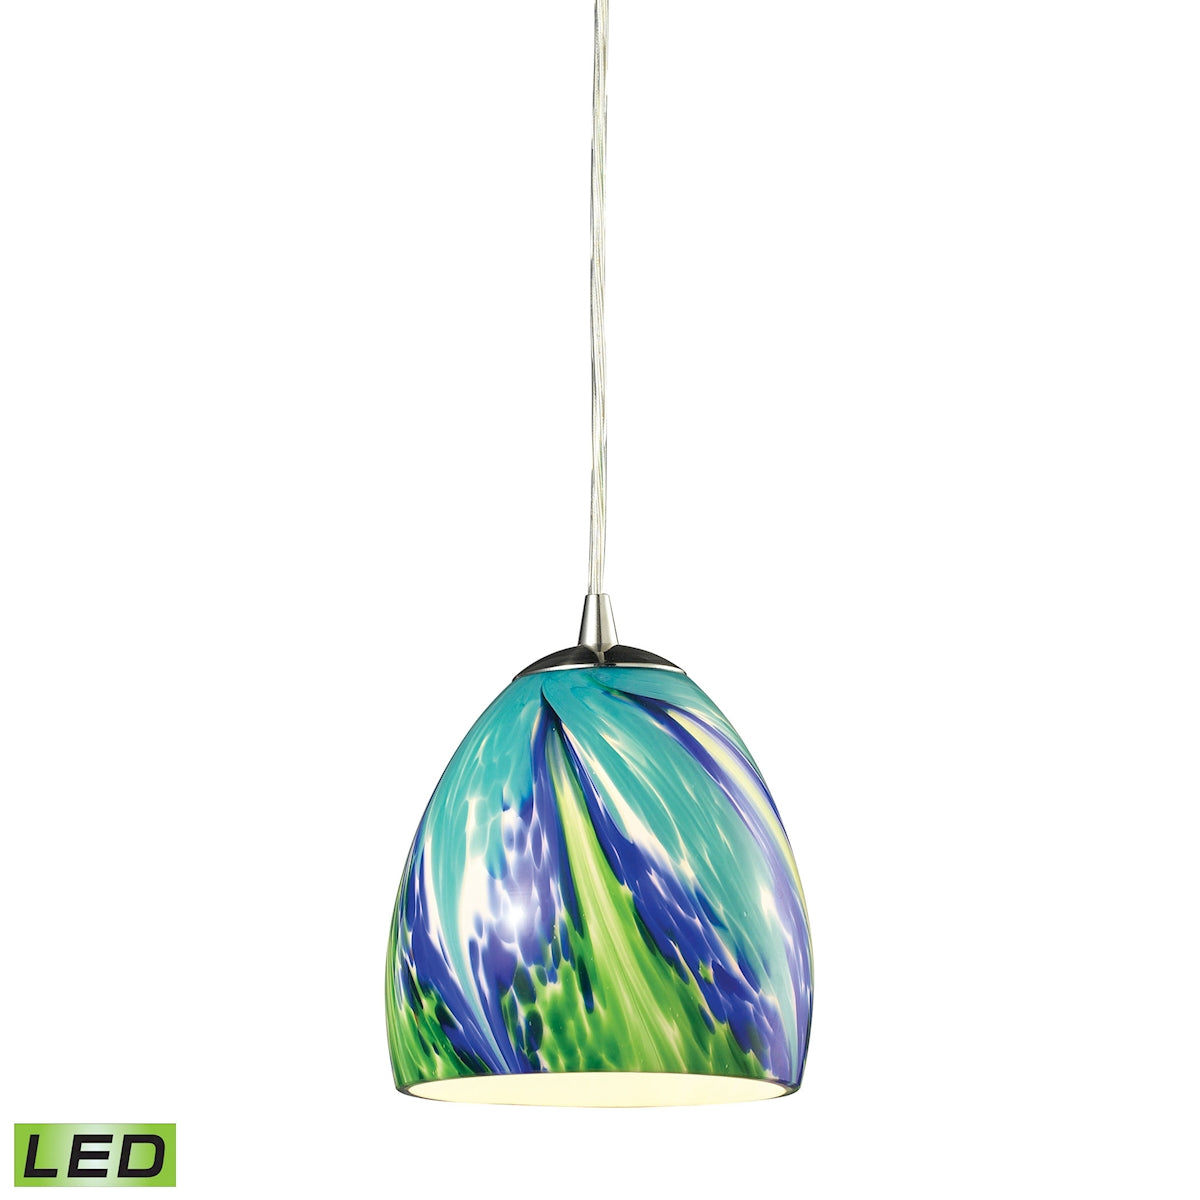 ELK Lighting 31445/1TB-LED Colorwave 1-Light Mini Pendant in Satin Nickel with Blue and Green Glass - Includes LED Bulb